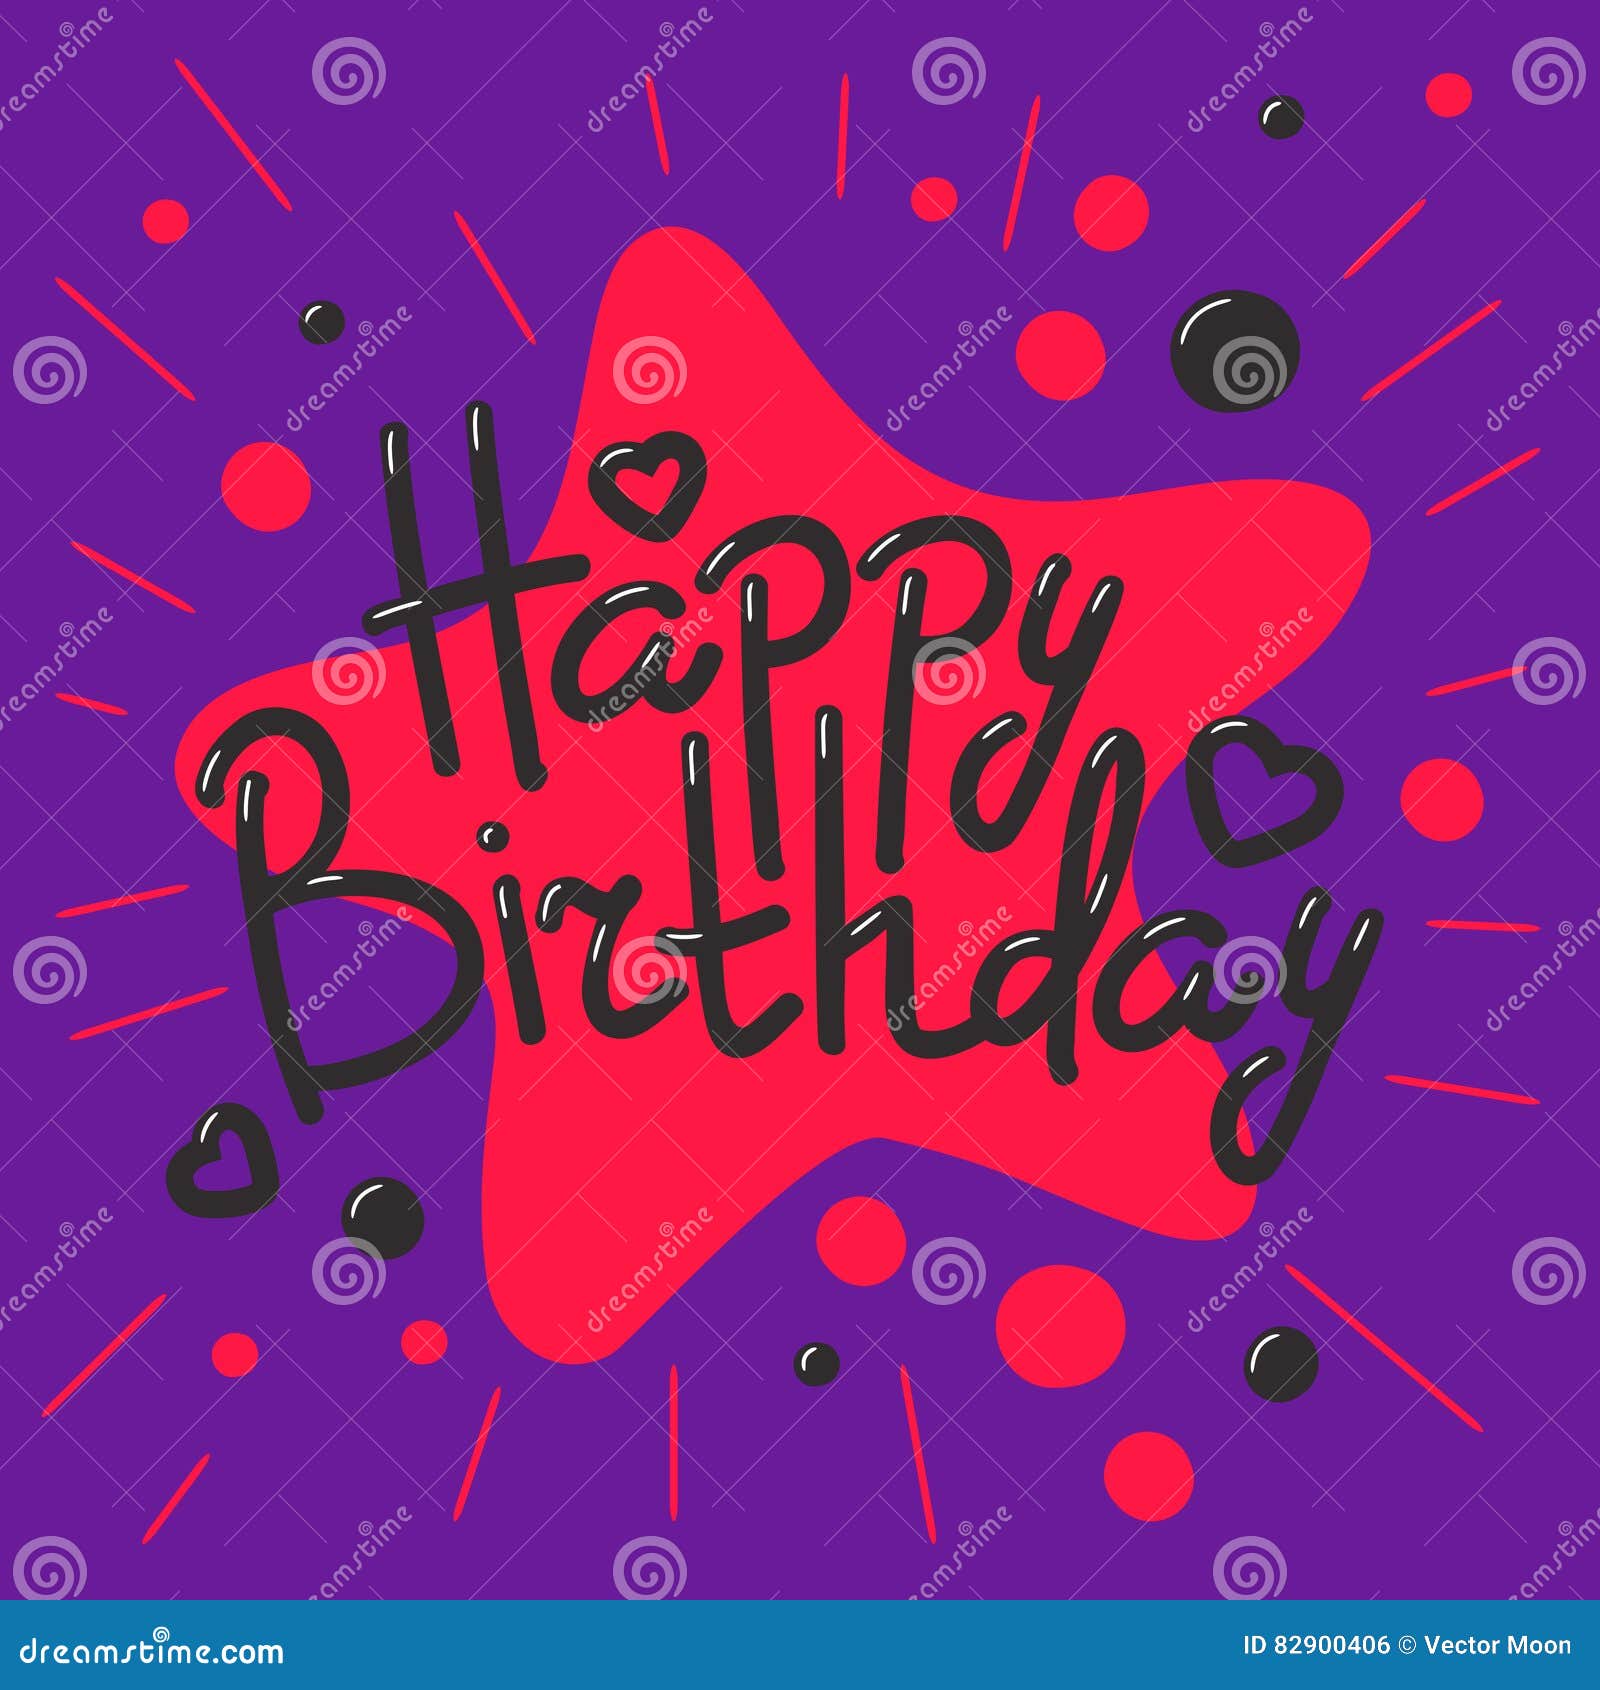 Beautiful Happy Birthday Invitation Cards Vector Stock Vector Illustration Of Background Event 82900406